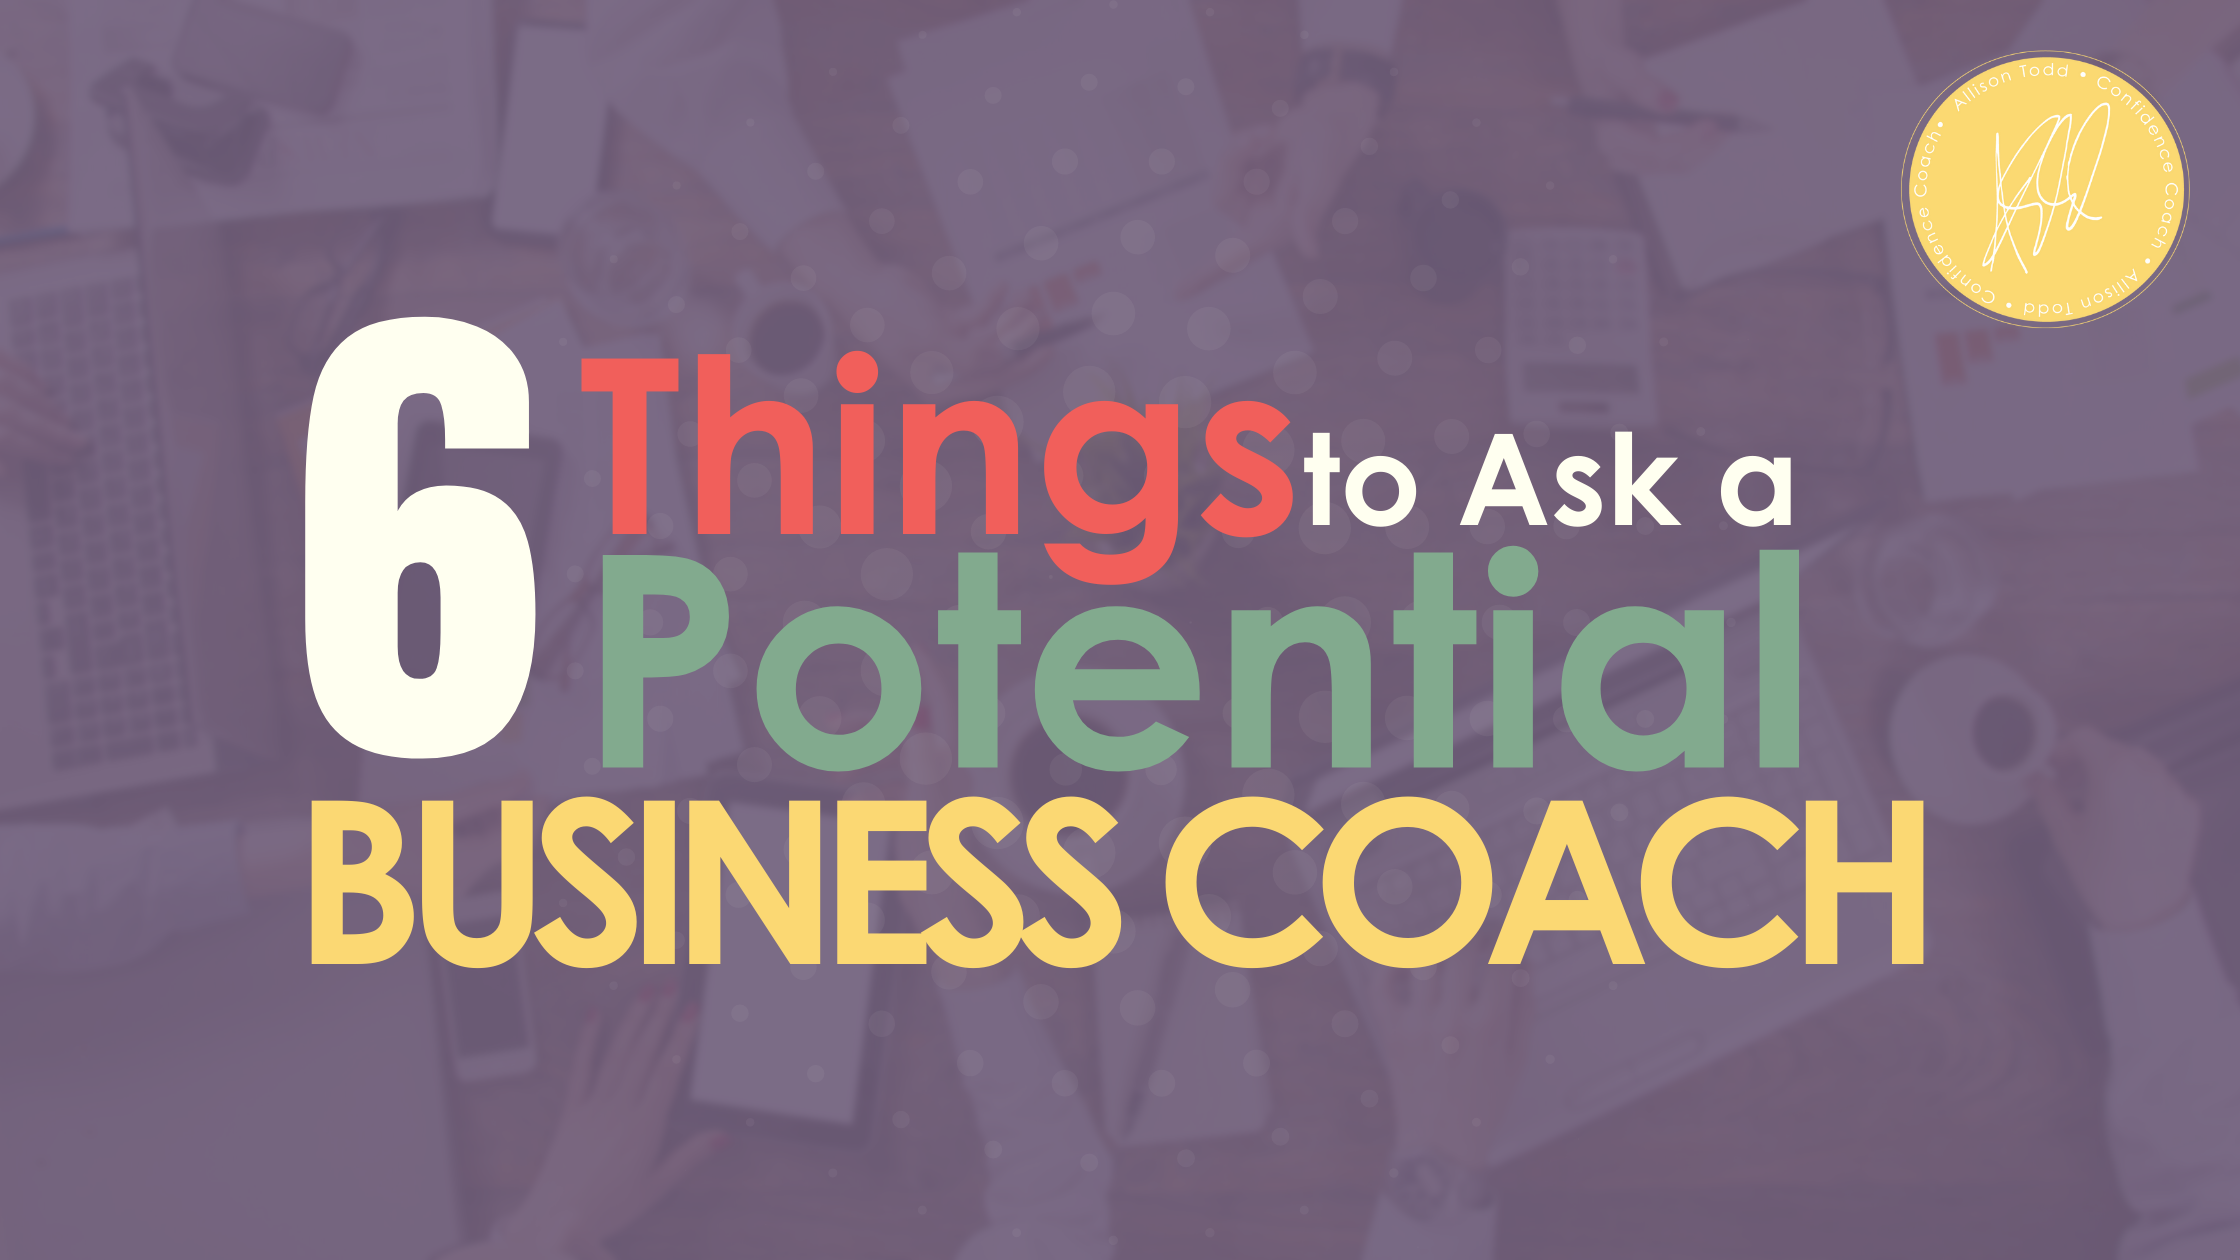 6 Things to Ask a Potential Business Coach